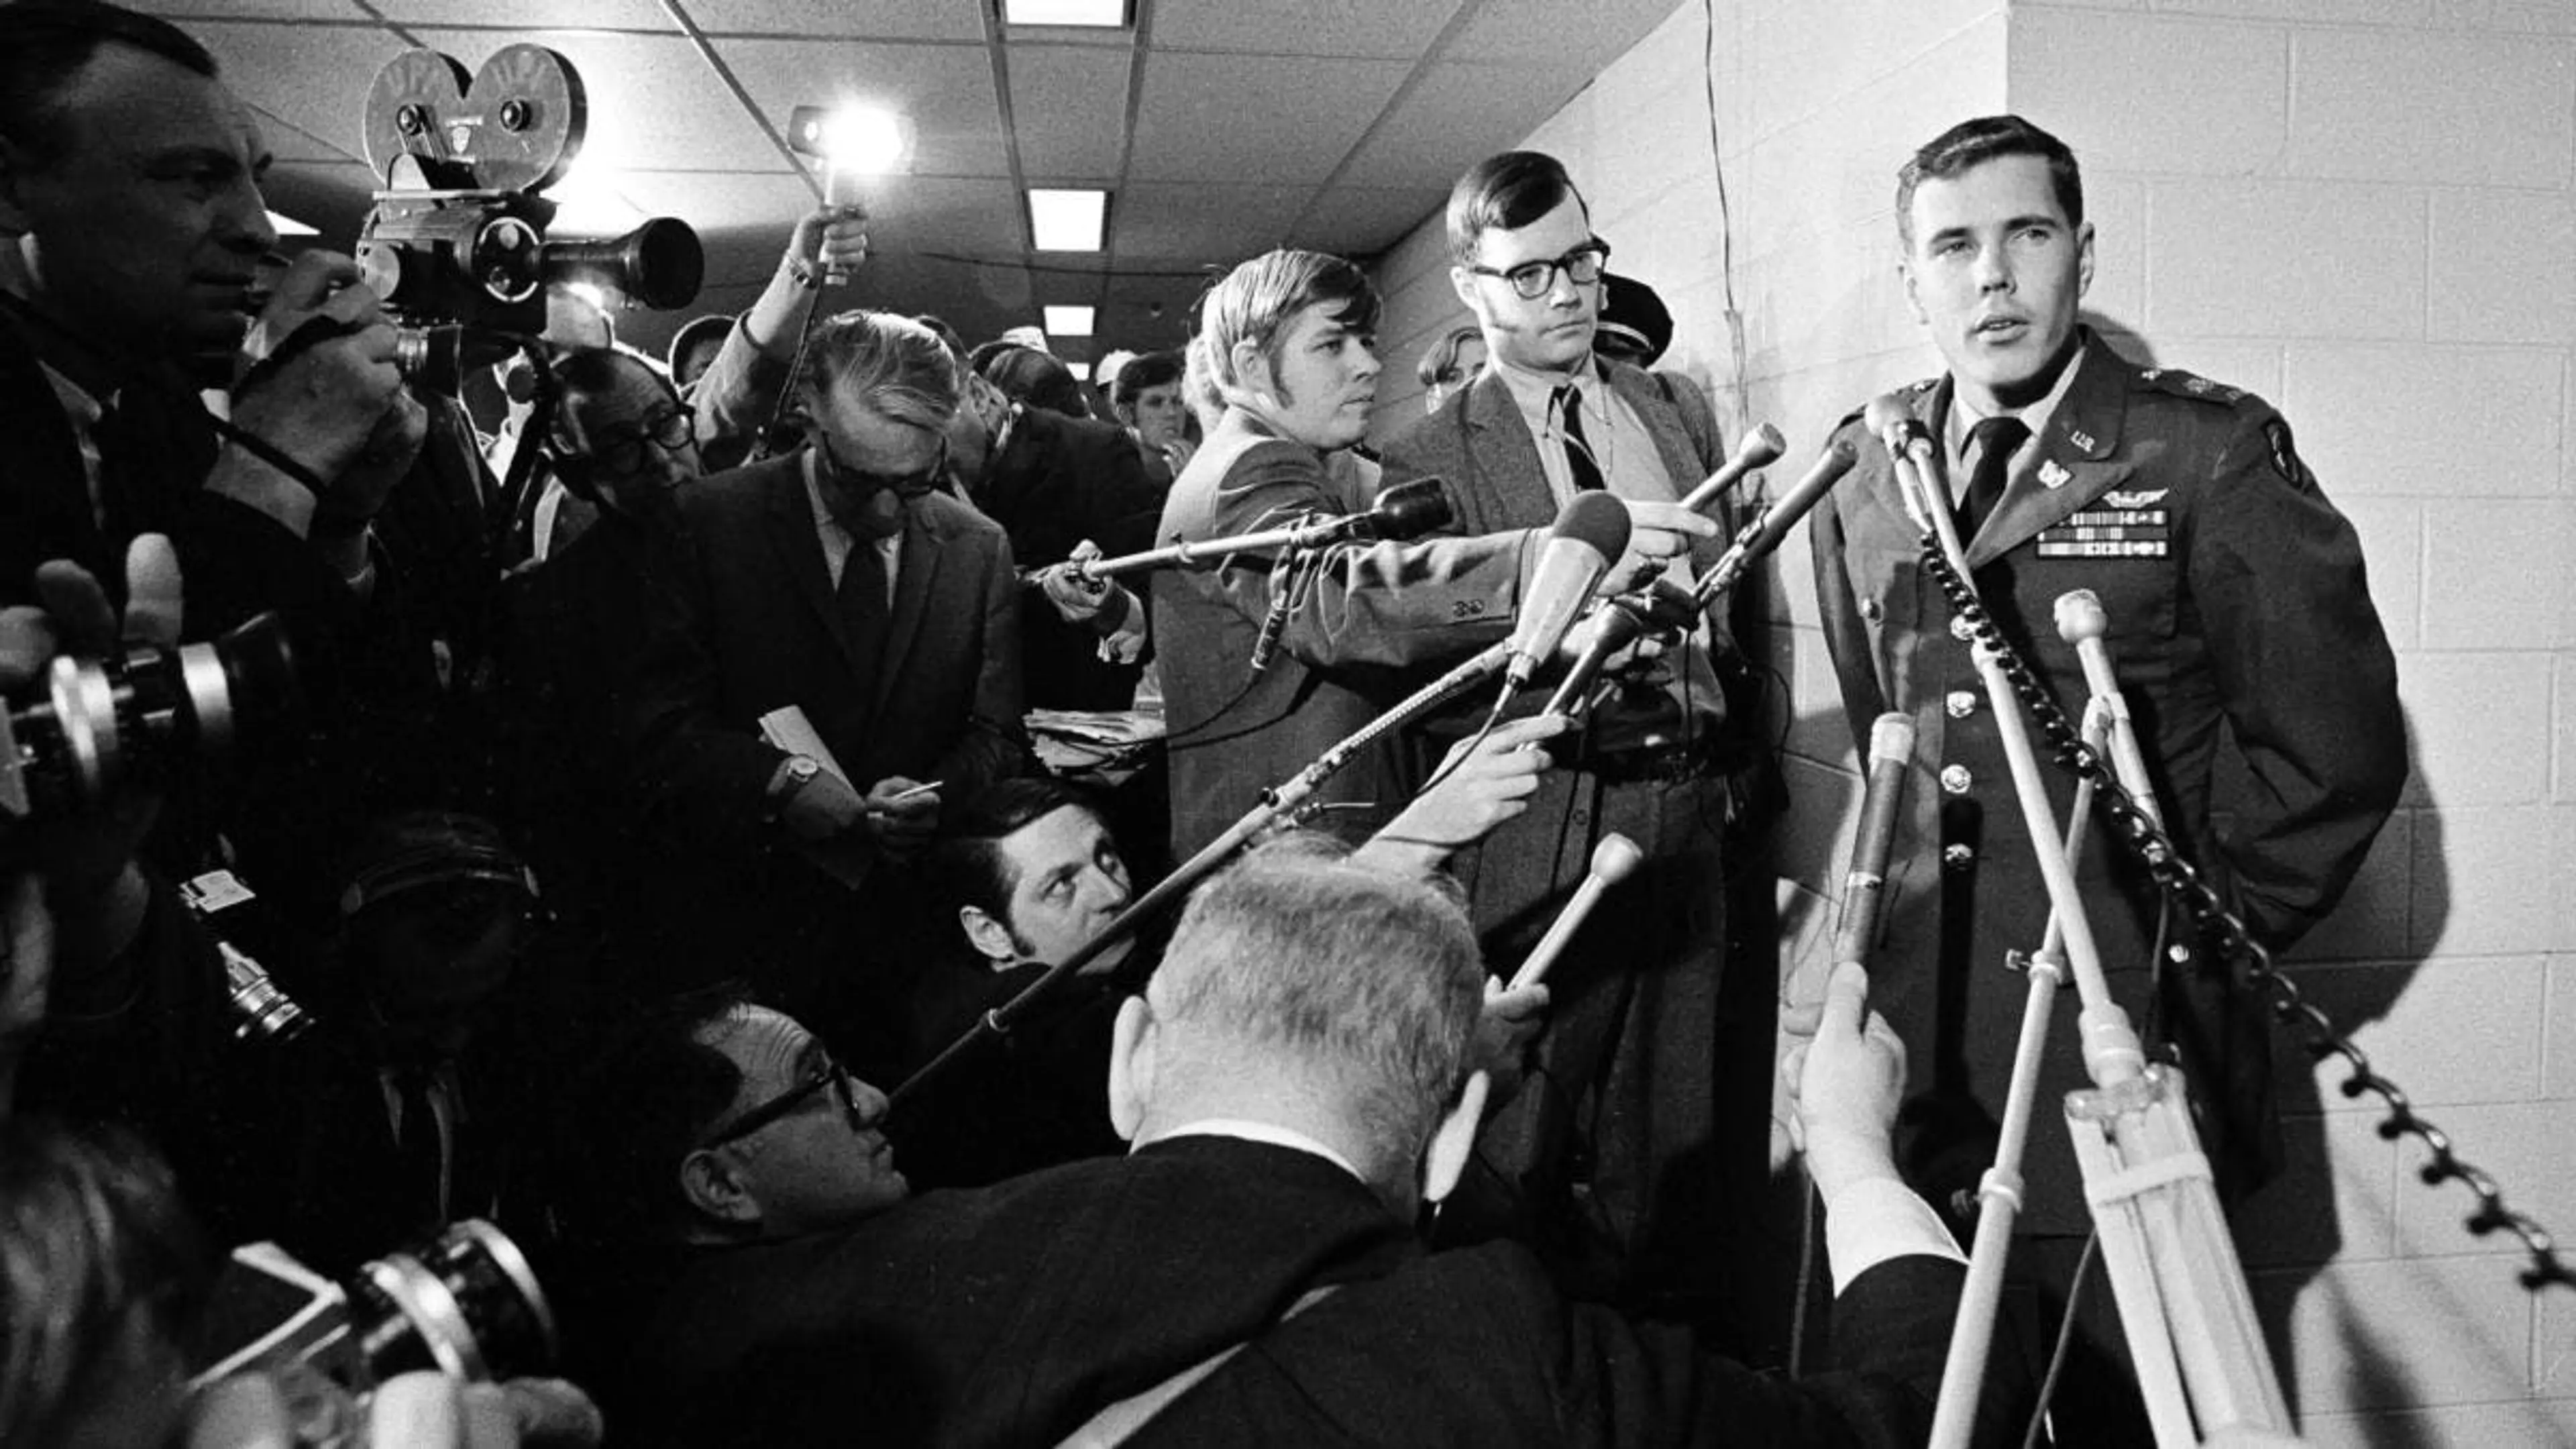 HUGH C. THOMPSON ARMY HELICOPTER PILOT WHO STOPS THE MASSACRE, MEETING WITH NEWSMEN AFTER APPEARING BEFORE AN ARMY HEARING AT THE PENTAGON INTO THE ORIGINAL INVESTIGATION OF THE MASSACRE AT MY LAI, 1969. (CREDIT: AP PHOTO)